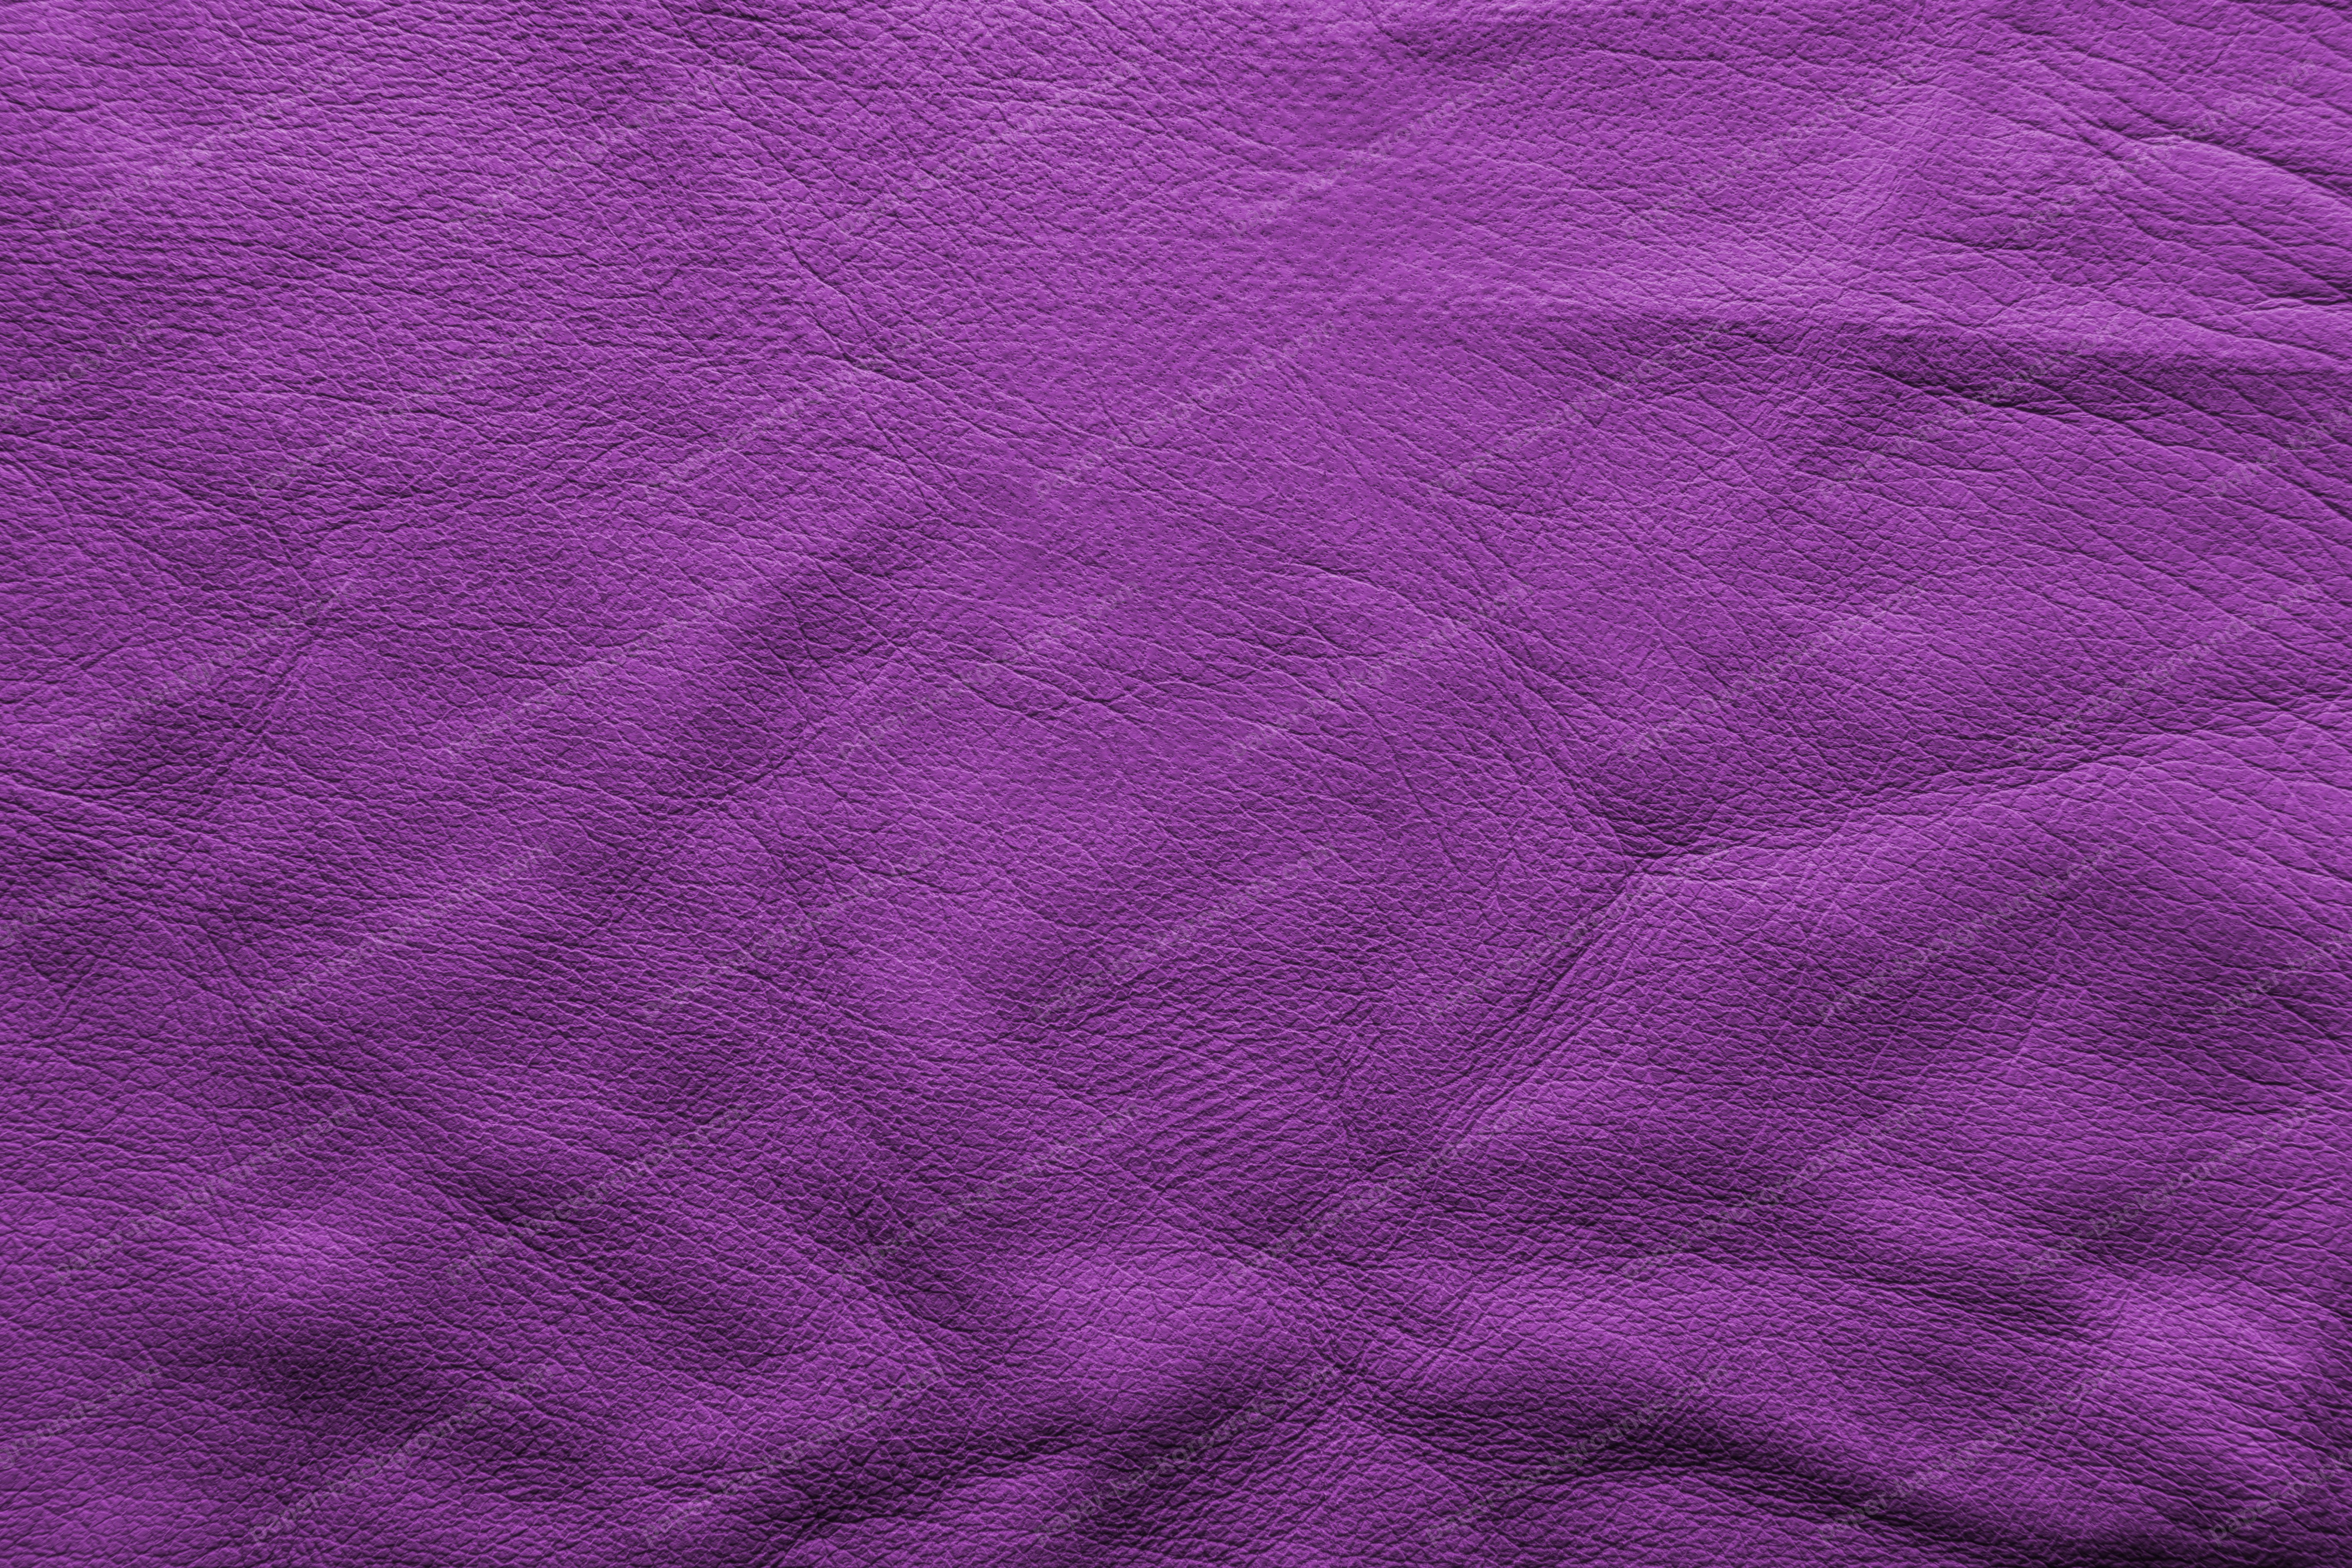 Vintage Purple Soft Leather Background High Res